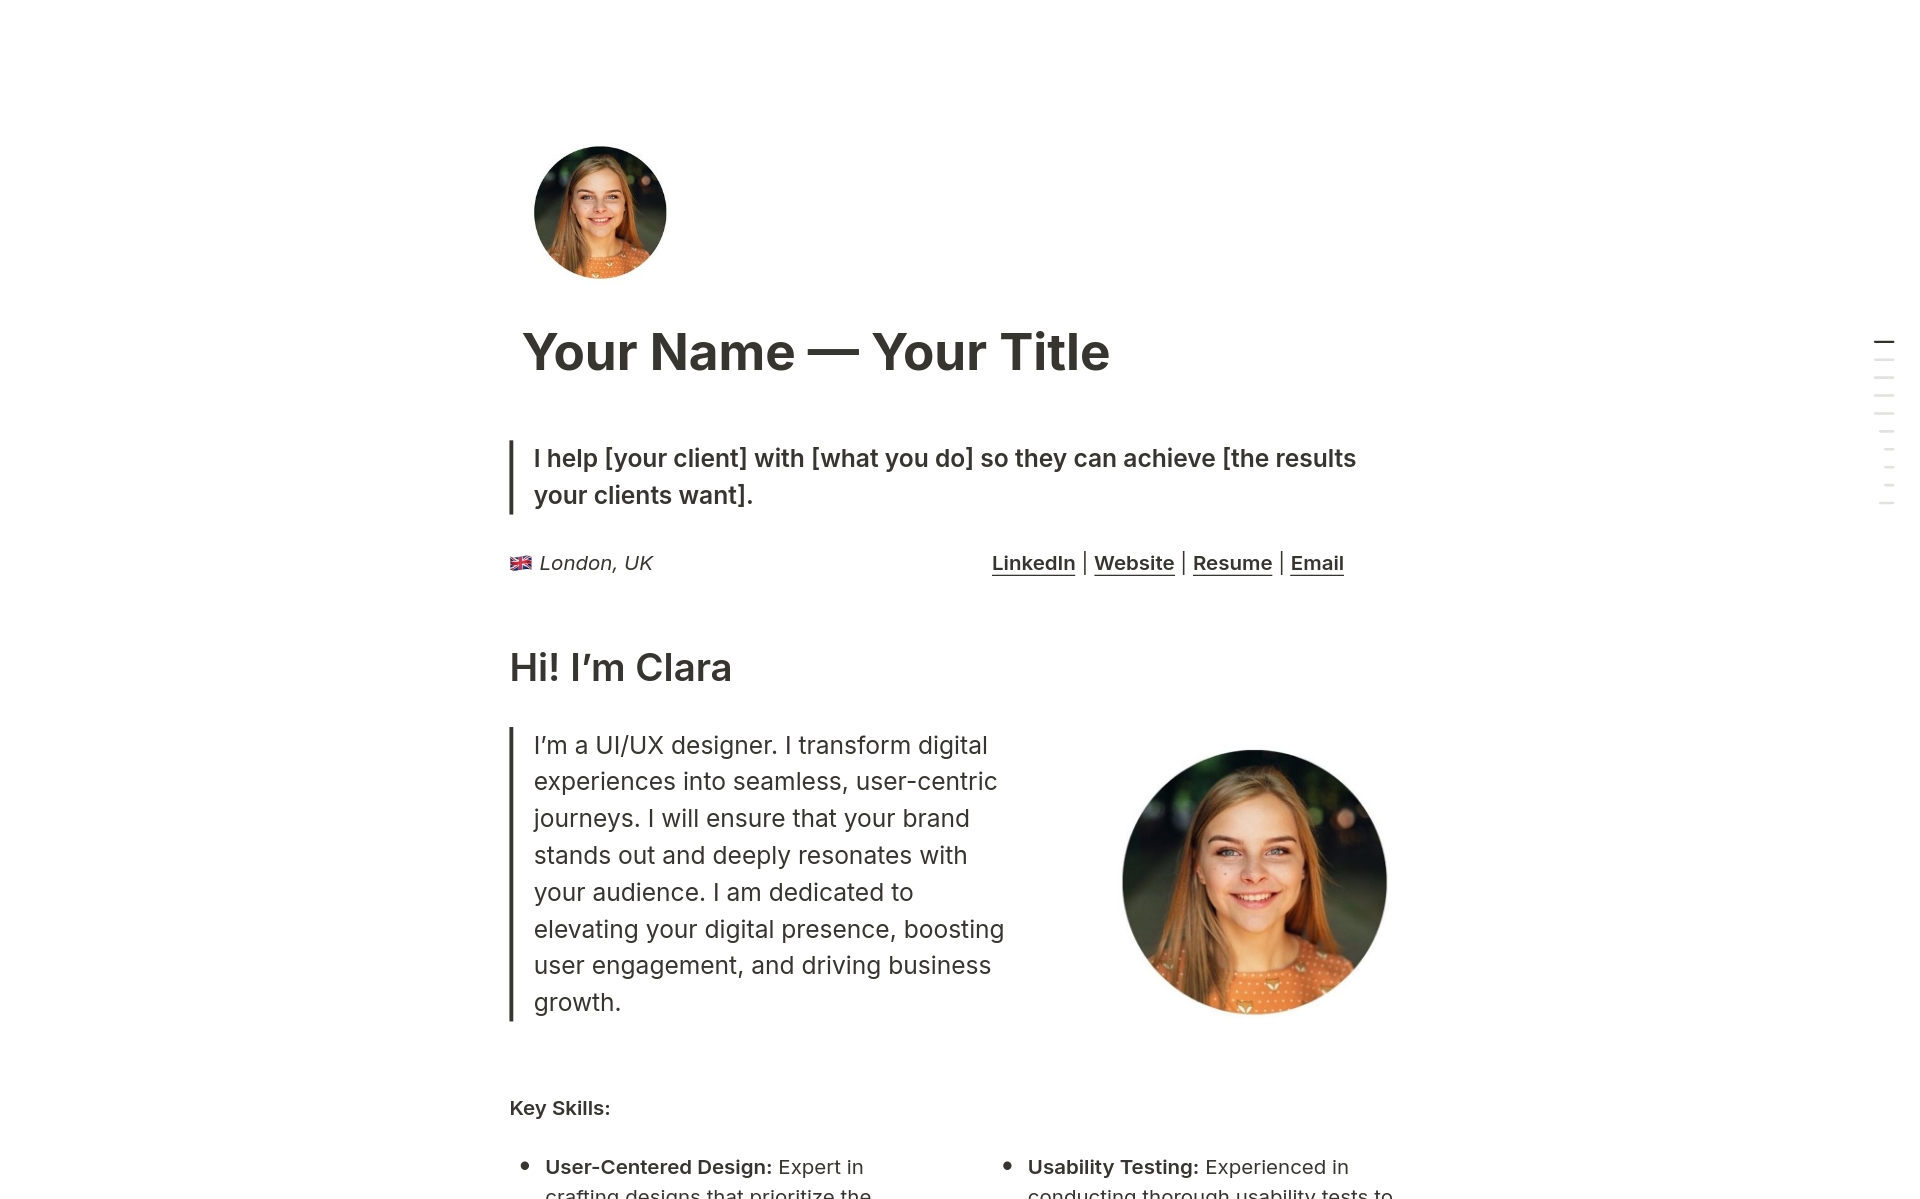 Get new clients easily with this Personal Website & Portfolio Template in Notion. Edit & share your portfolio with prospects and showcase your skills and projects. This bundle has an editable Resume template to link to your portfolio or download as a PDF.